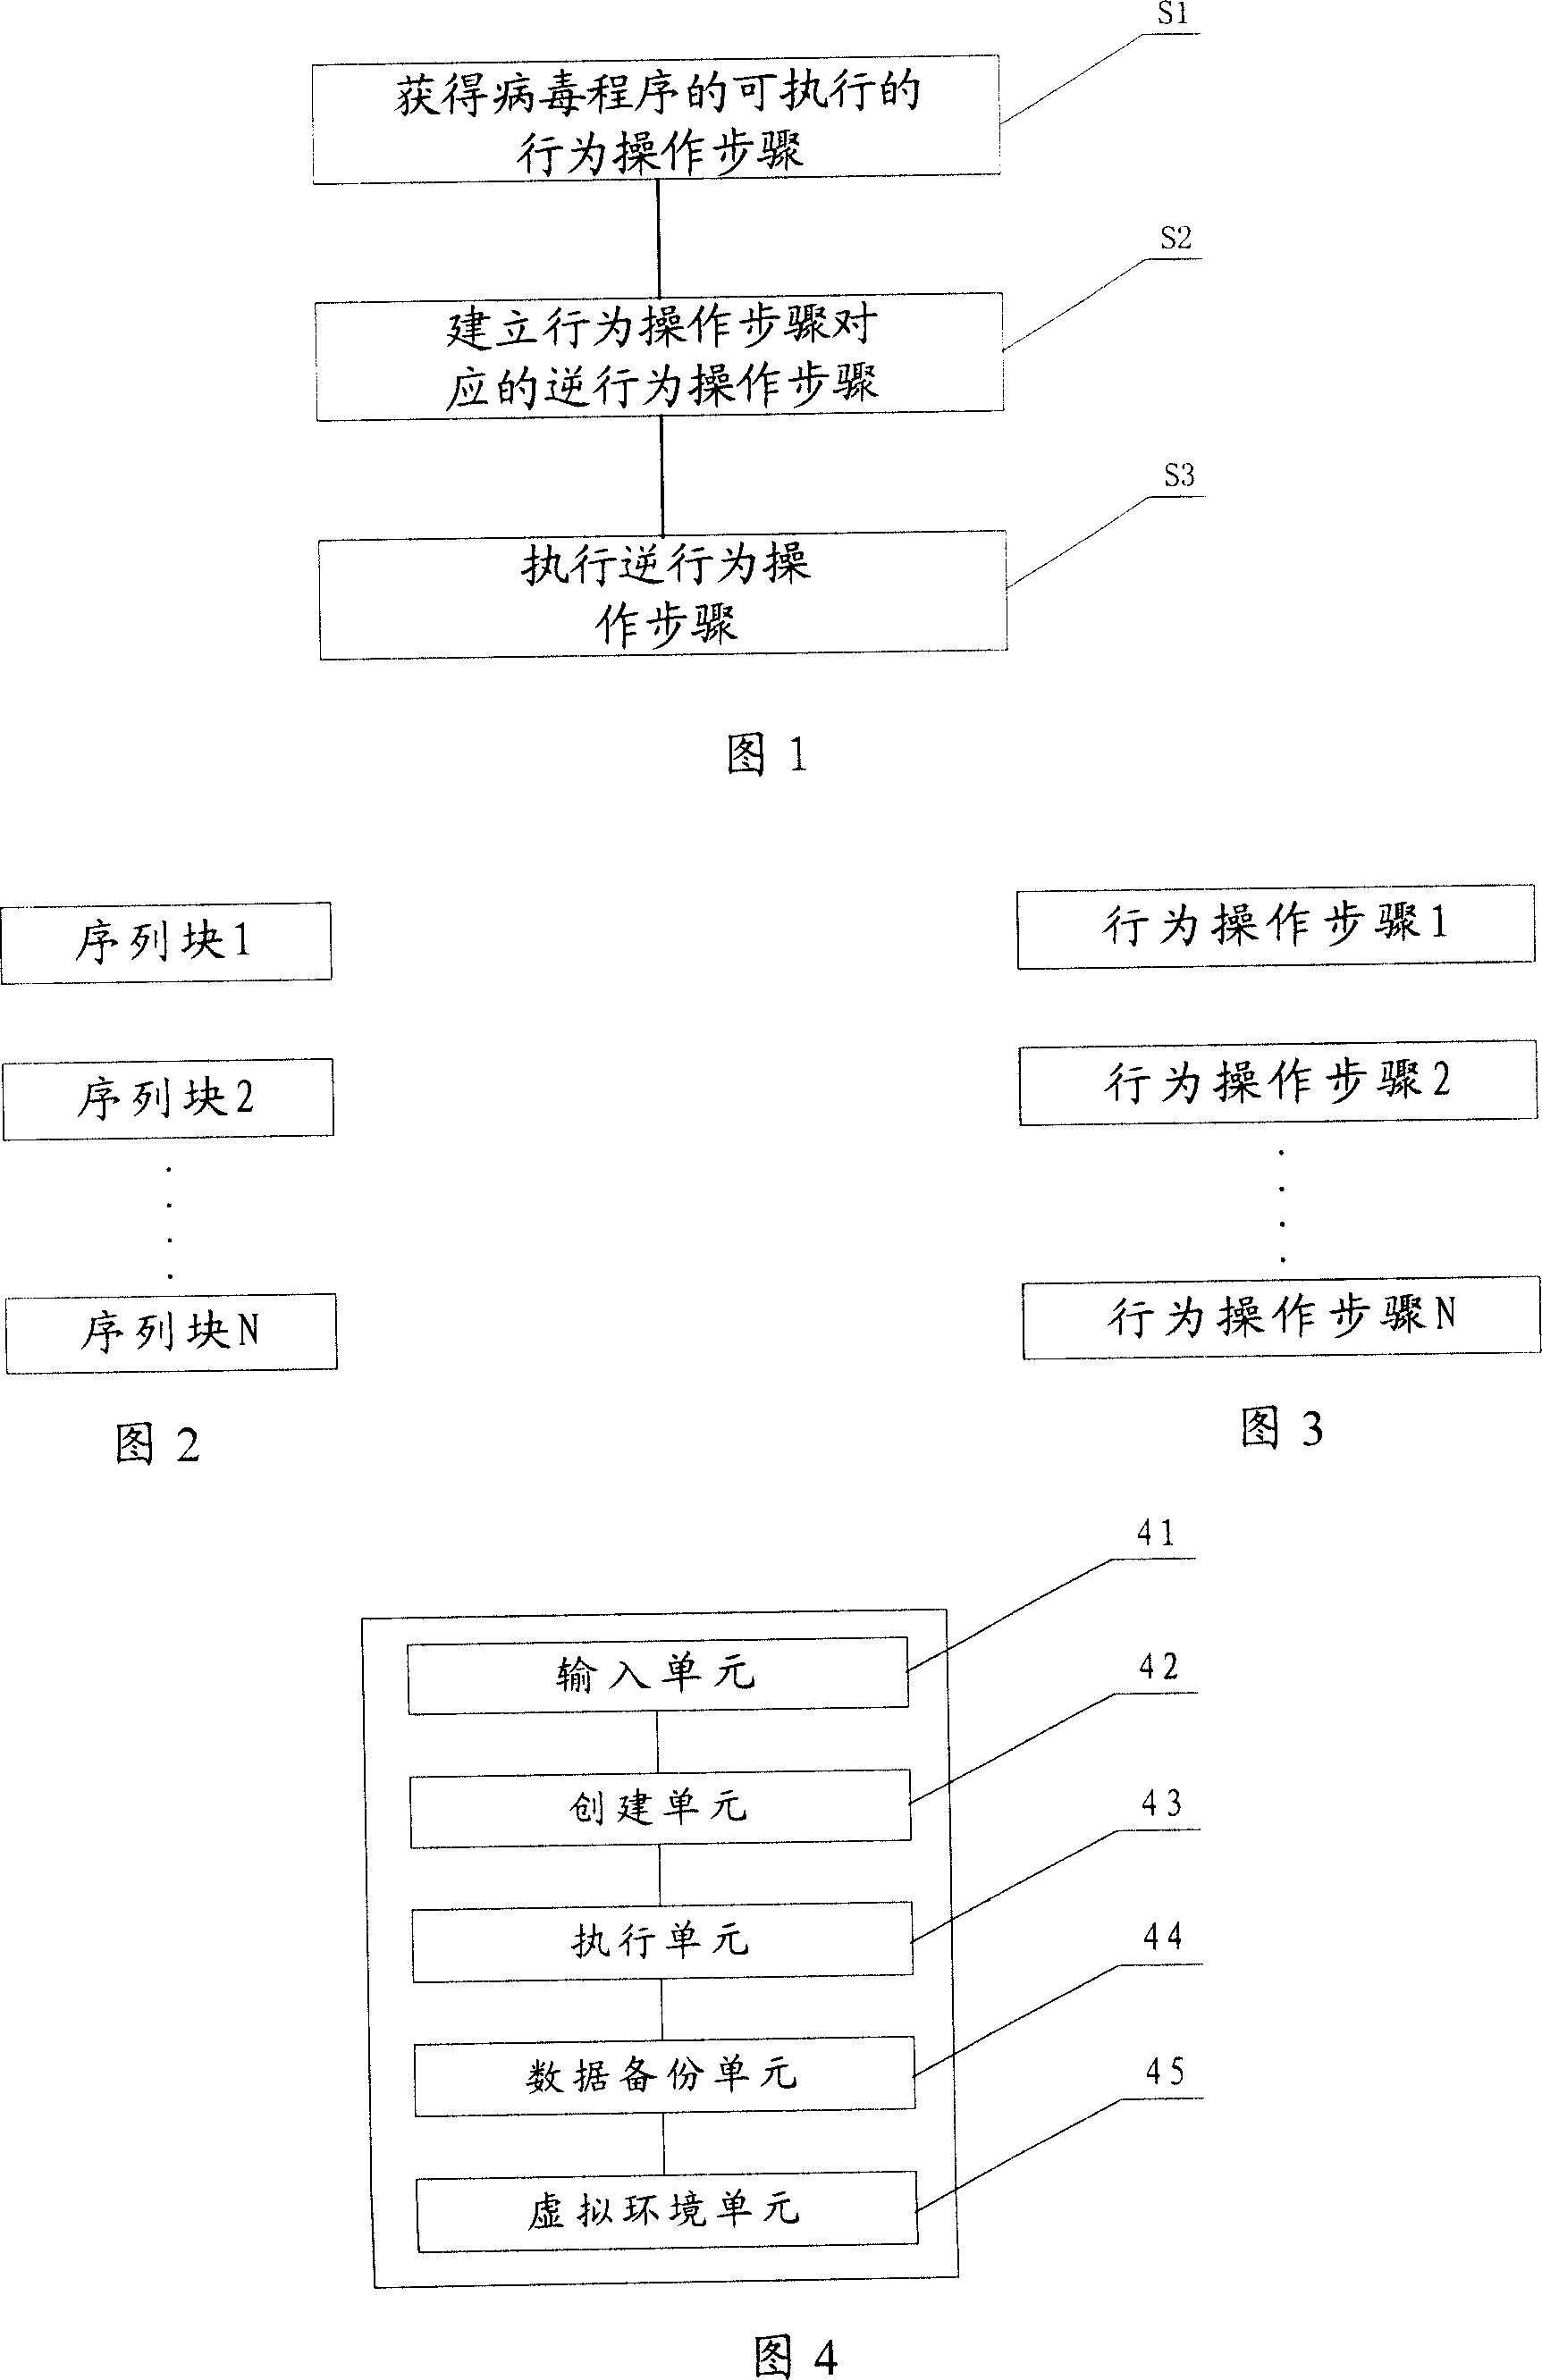 Method for recovering data damaged by virus programe, apparatus and virus clearing method